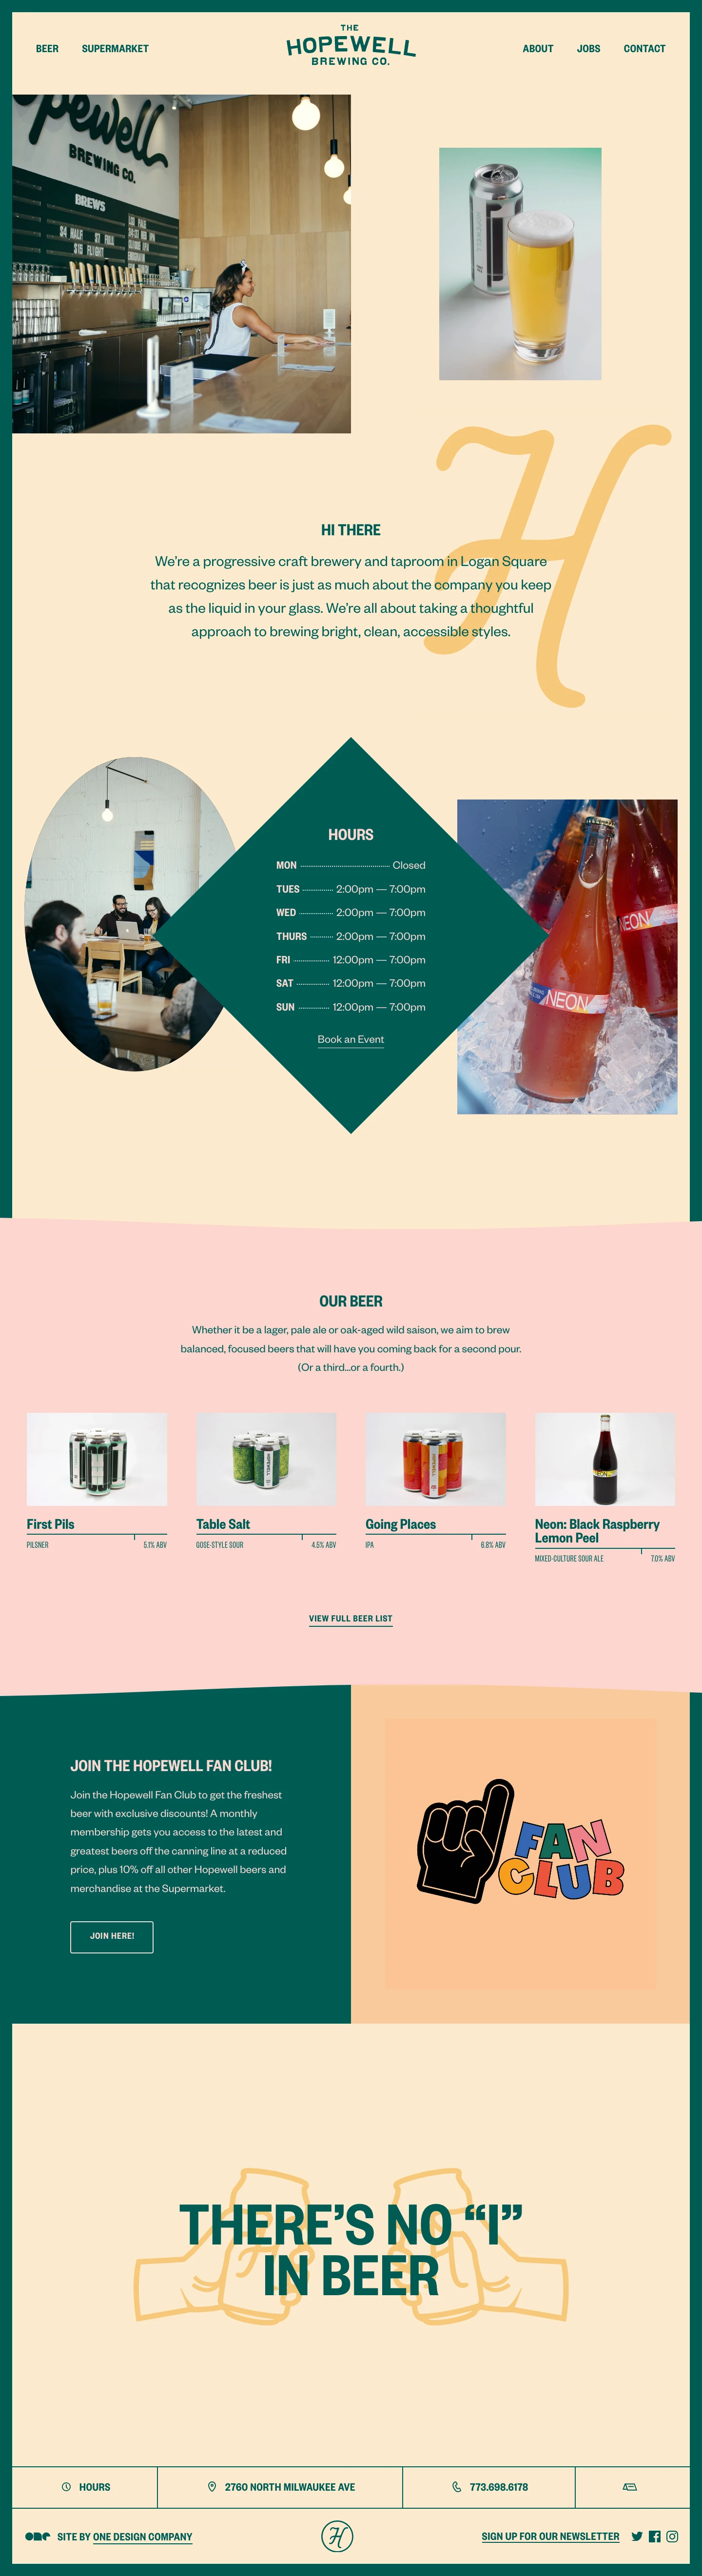 Hopewell Brewing Landing Page Example: We’re a progressive craft brewery and taproom in Logan Square that recognizes beer is just as much about the company you keep as the liquid in your glass. We’re all about taking a thoughtful approach to brewing bright, clean, accessible styles.